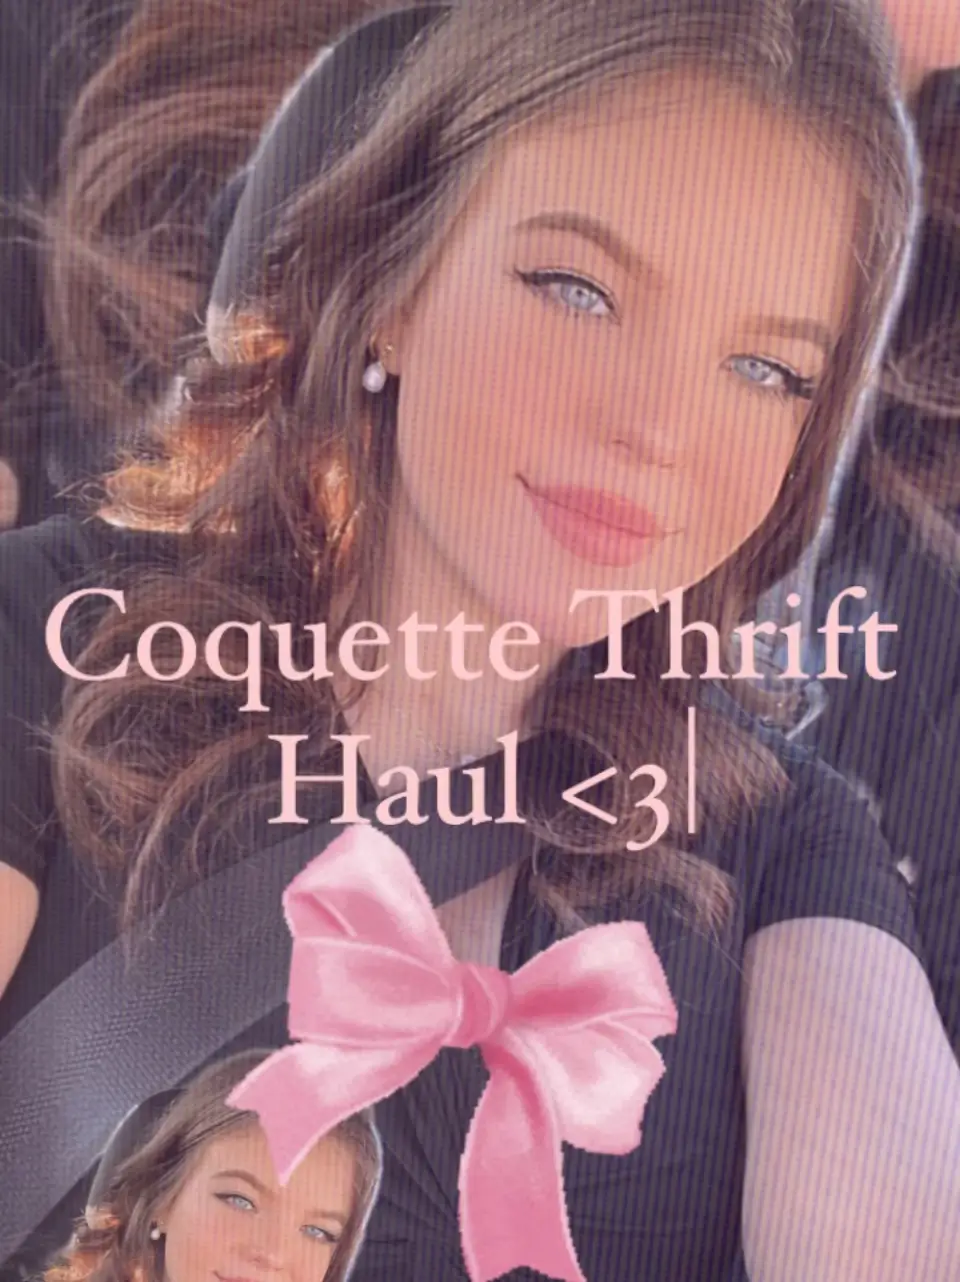 Coquette on X: Happy National Lingerie Day! We know how we'll be